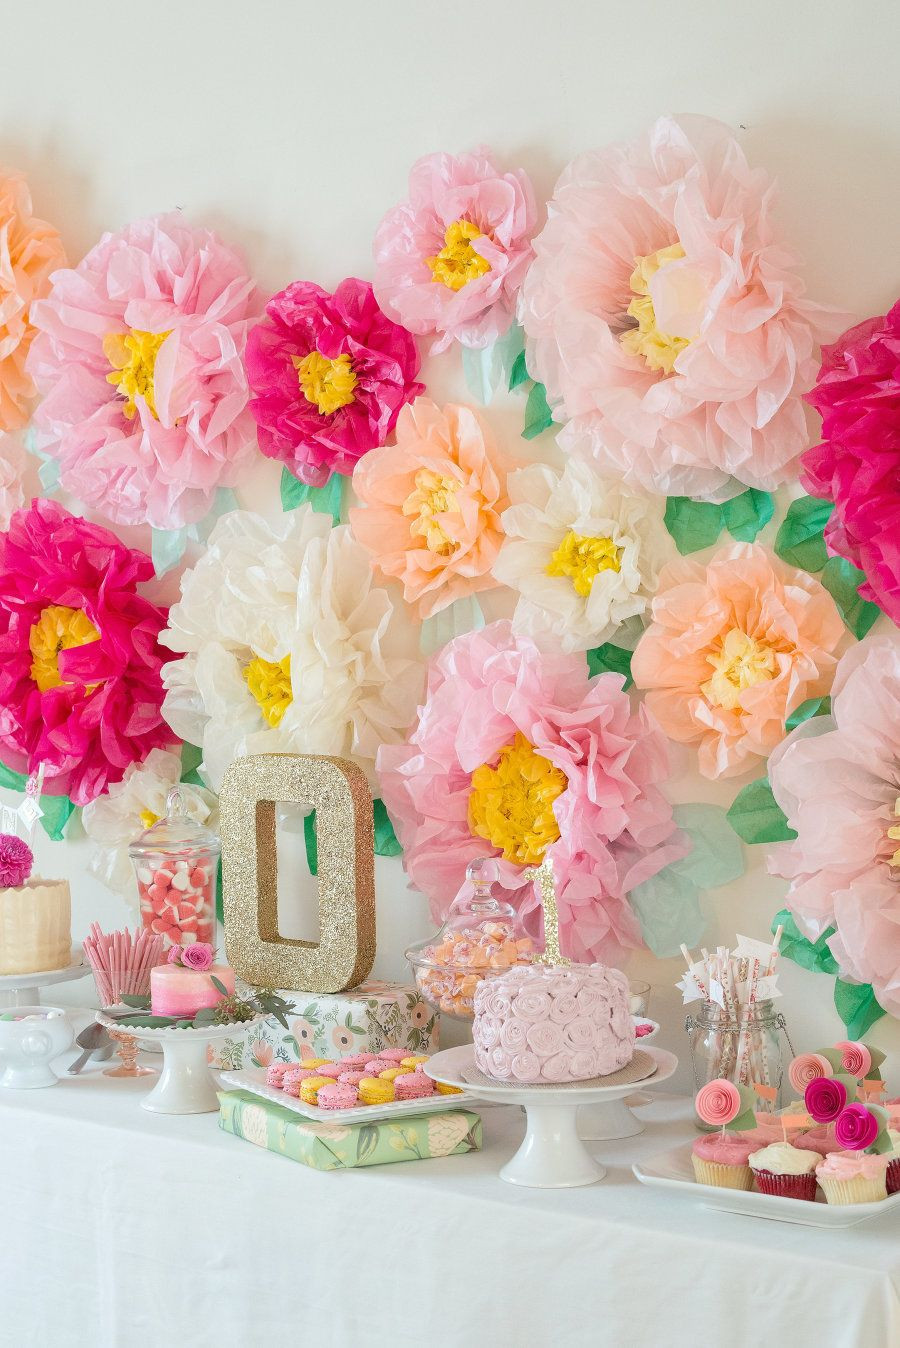 Flower Birthday Party Ideas
 Garden Party First Birthday with the Ultimate Flower